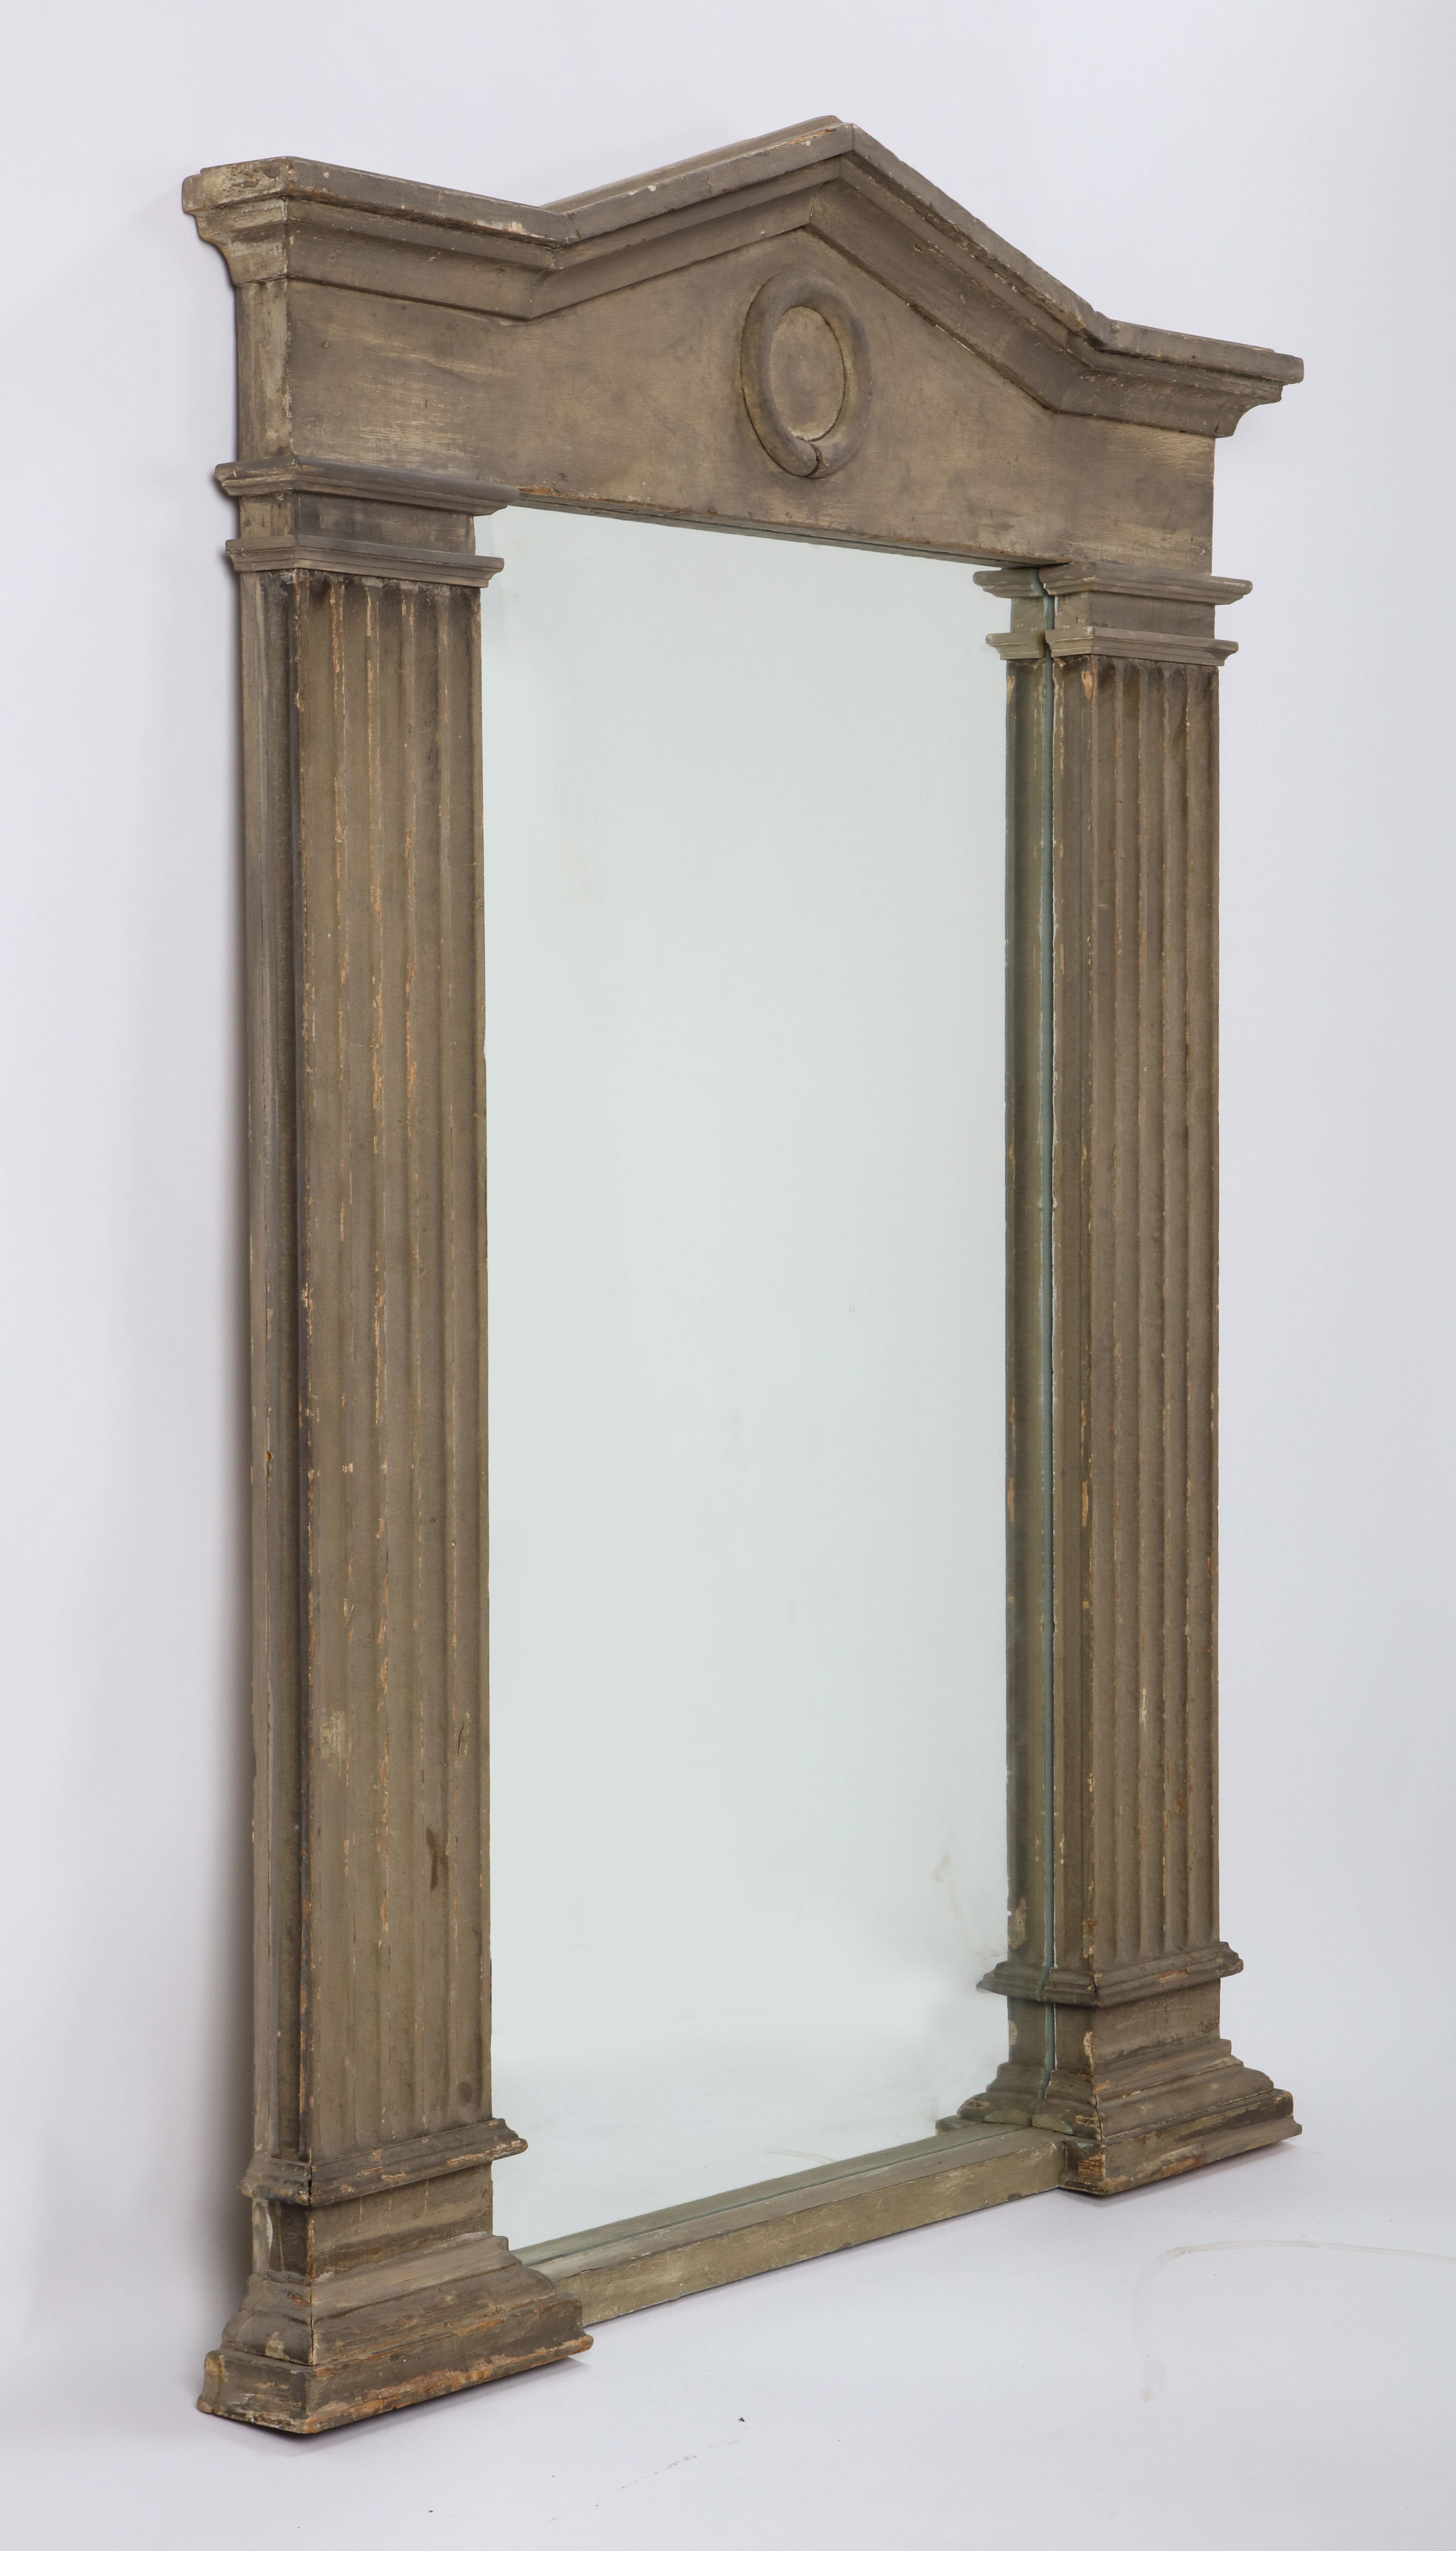 This Modern Neoclassical style mirror brings a little taste of the past to a contemporary audience. Evoking stylistic cues of antiquity— an arched pediment, fluted columns — this rectangular mirror will fit any Classics lover's needs. The soft dove